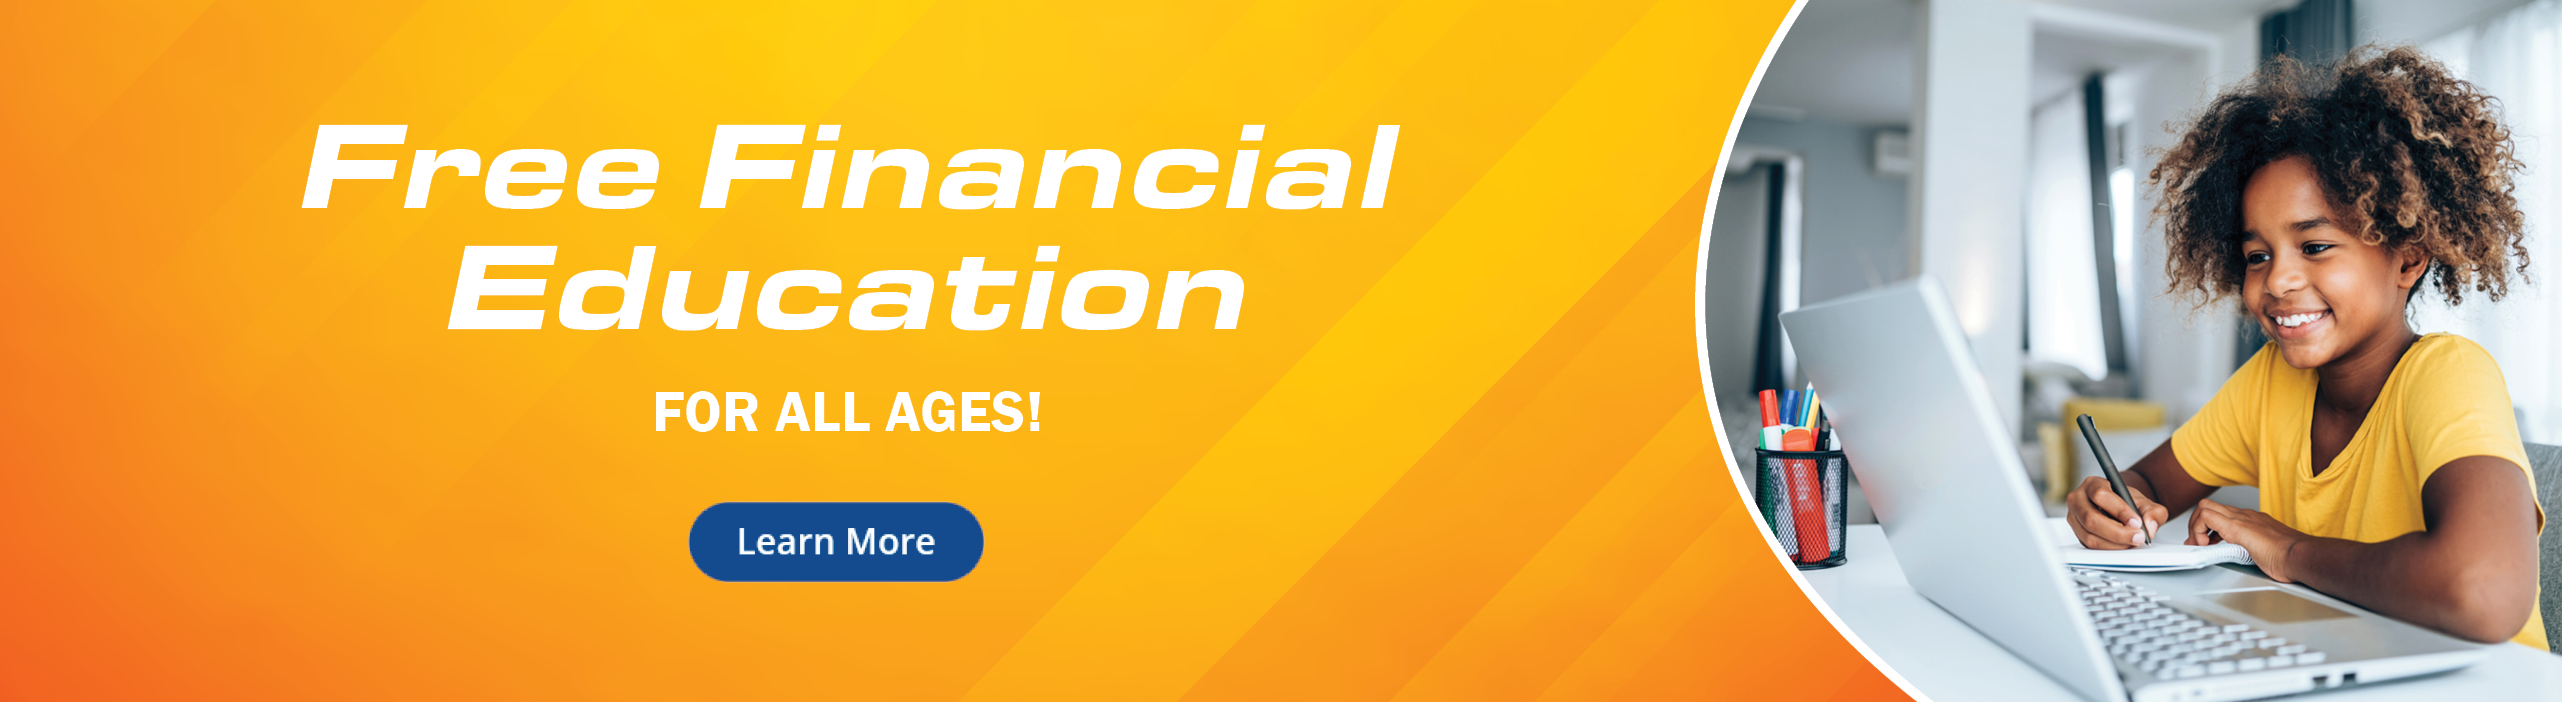 Free financial education for all ages!
Learn More